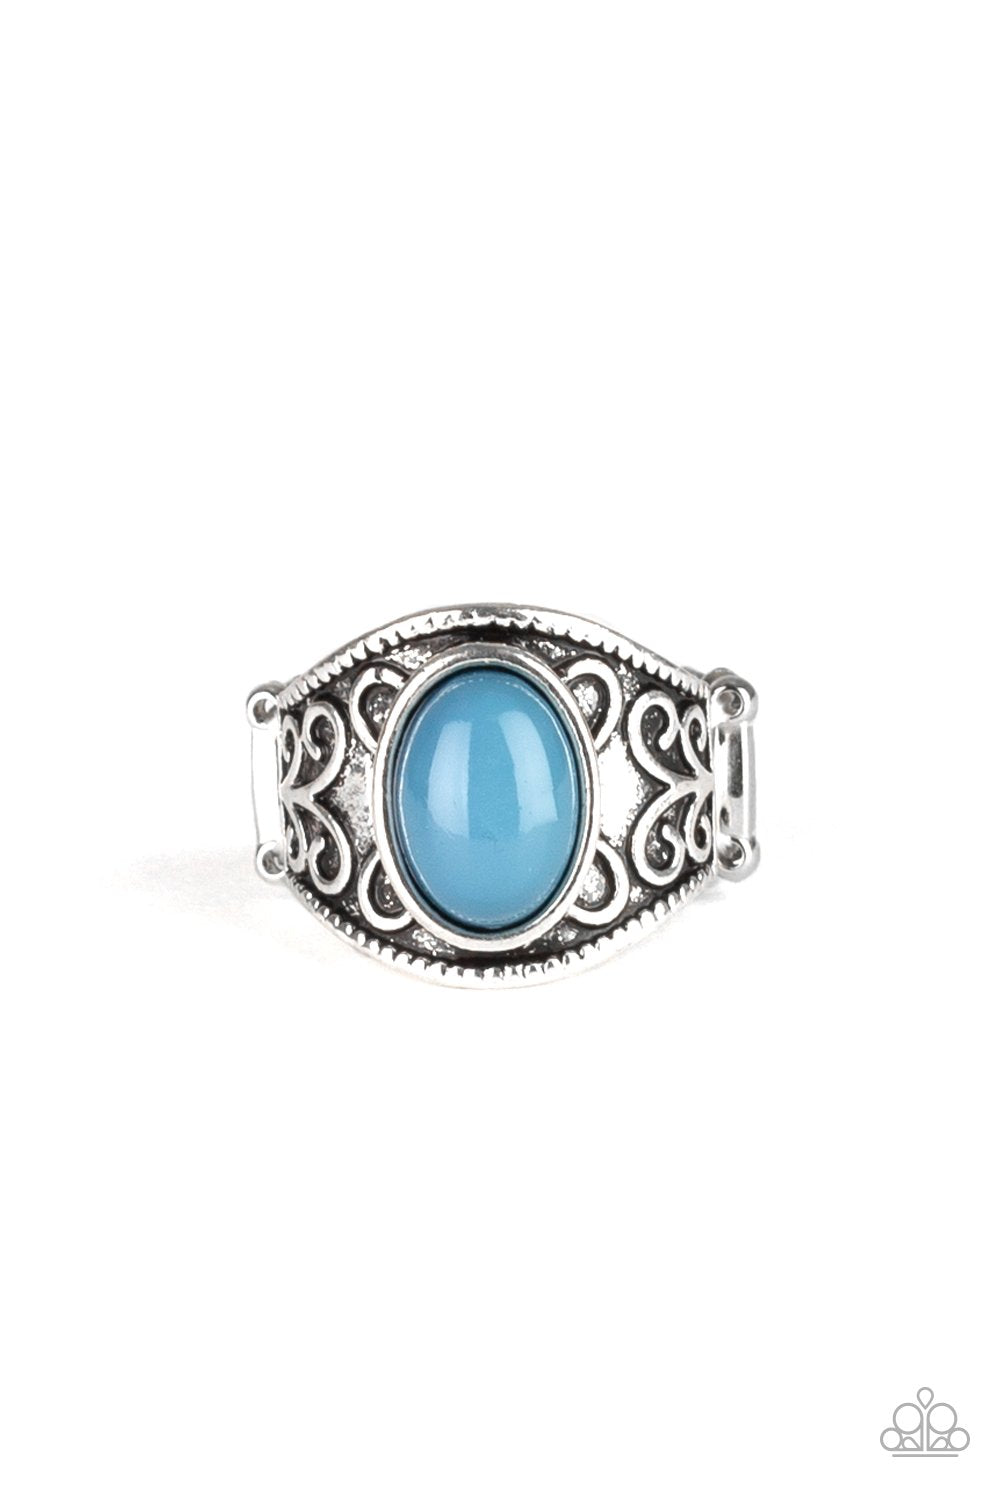 Let's Take It From The POP Blue Ring freeshipping - JewLz4u Gemstone Gallery